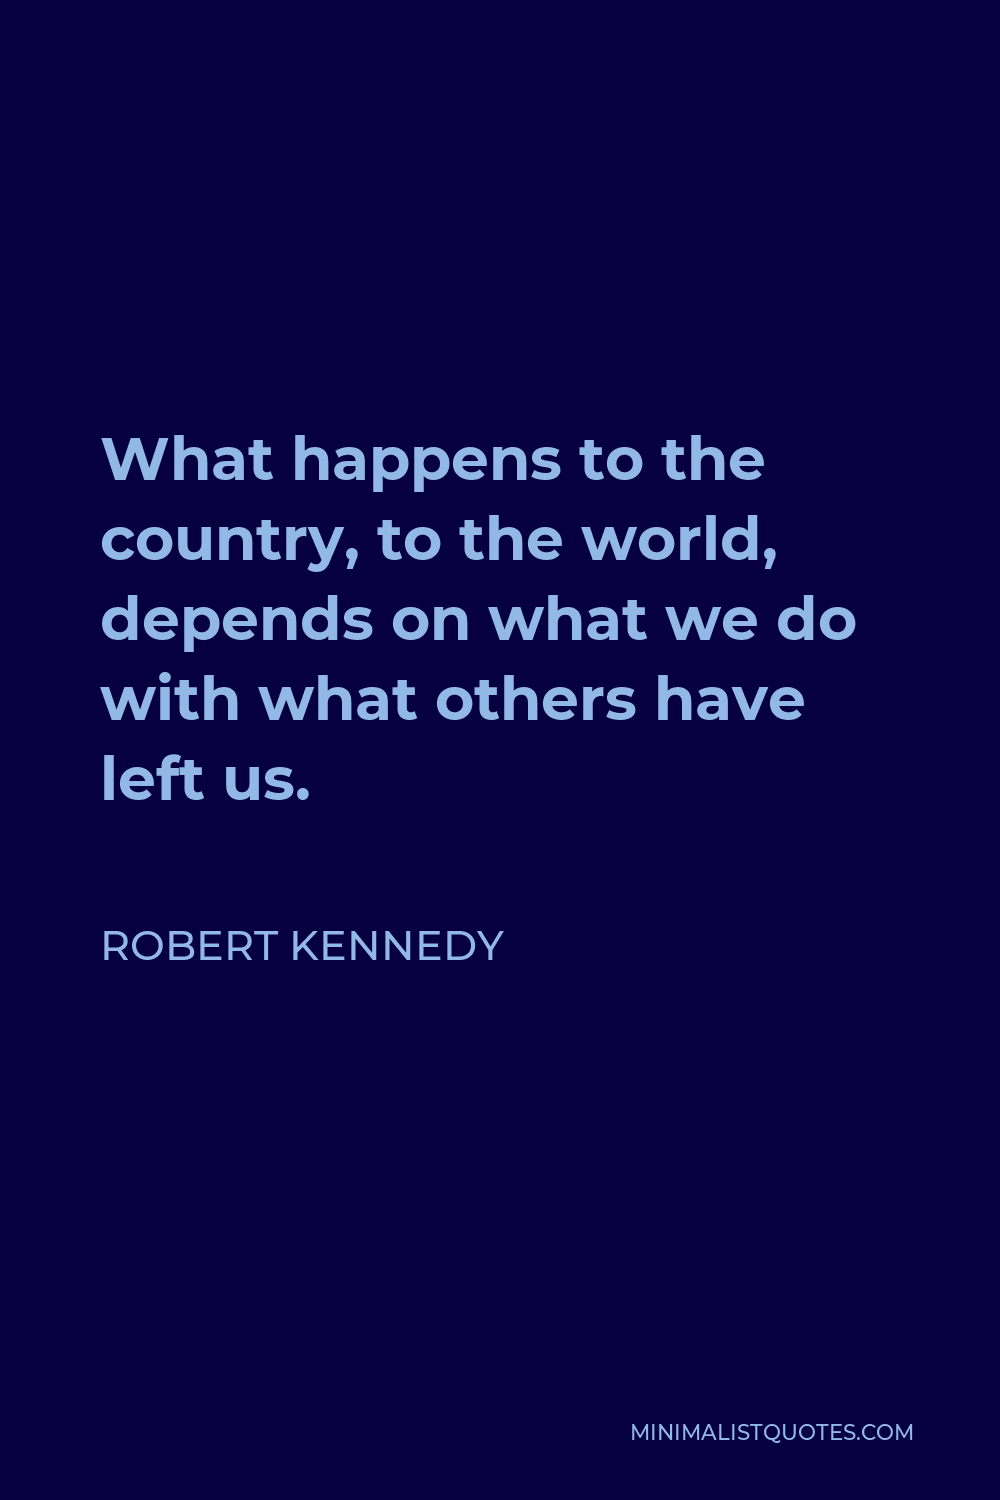 Robert Kennedy Quote - What happens to the country, to the world, depends on what we do with what others have left us.